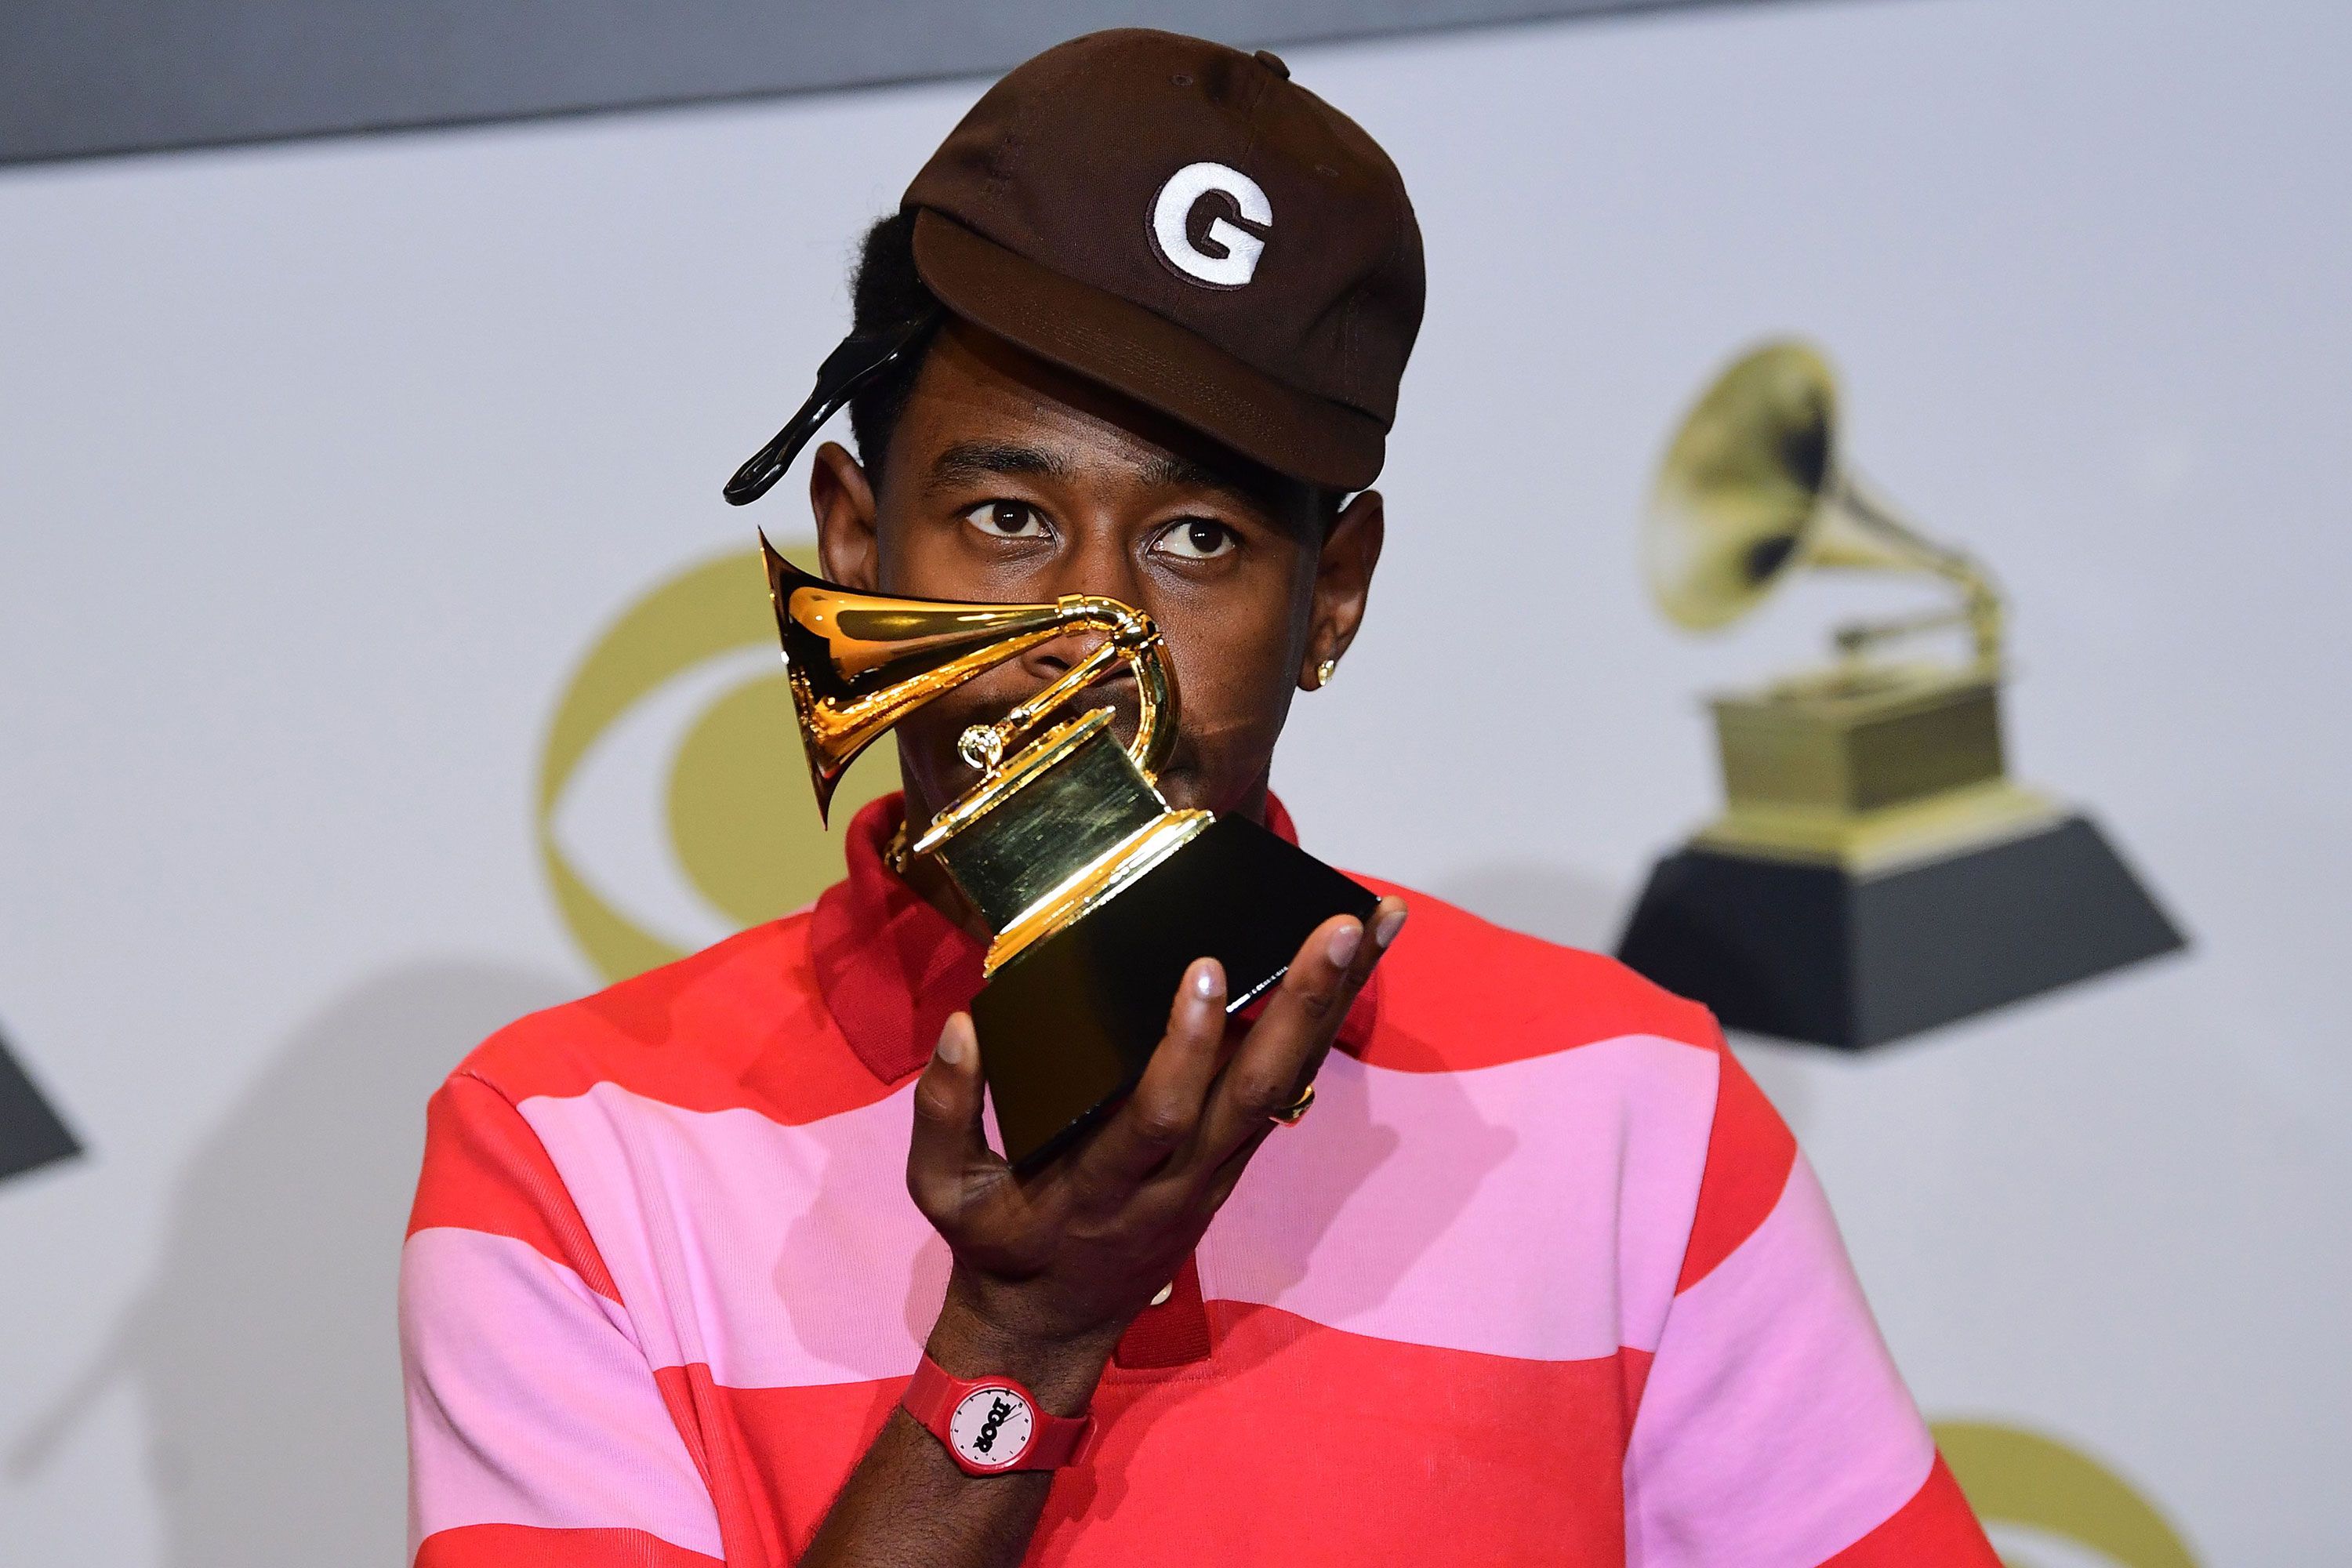 Tyler, the Creator accepts his Grammy on Instagram Live